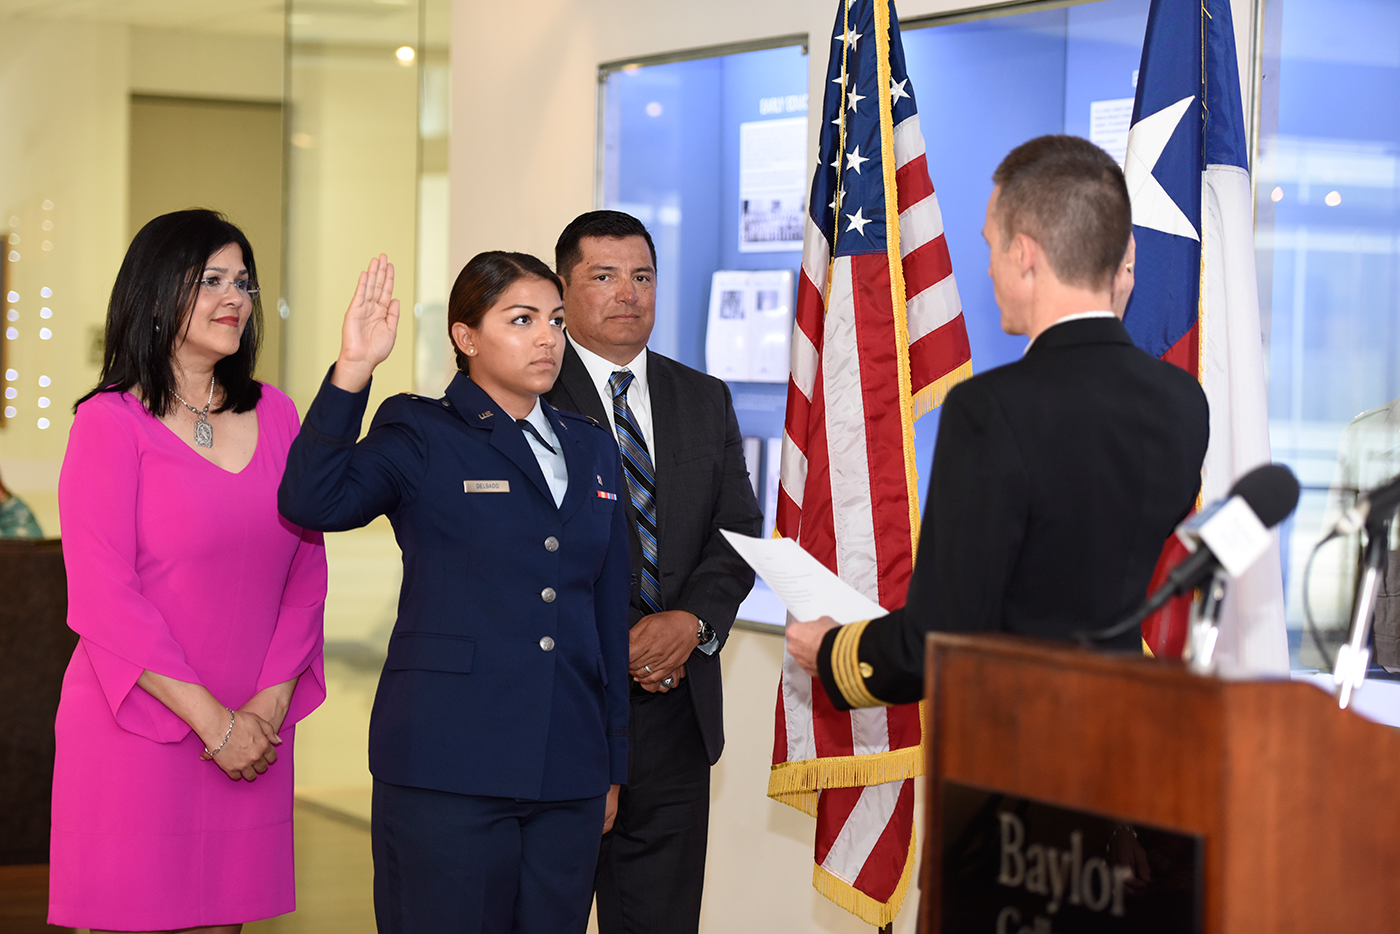 Amanda Delgado is sworn in to the U.S. Air Force during her military commissioning ceremony.